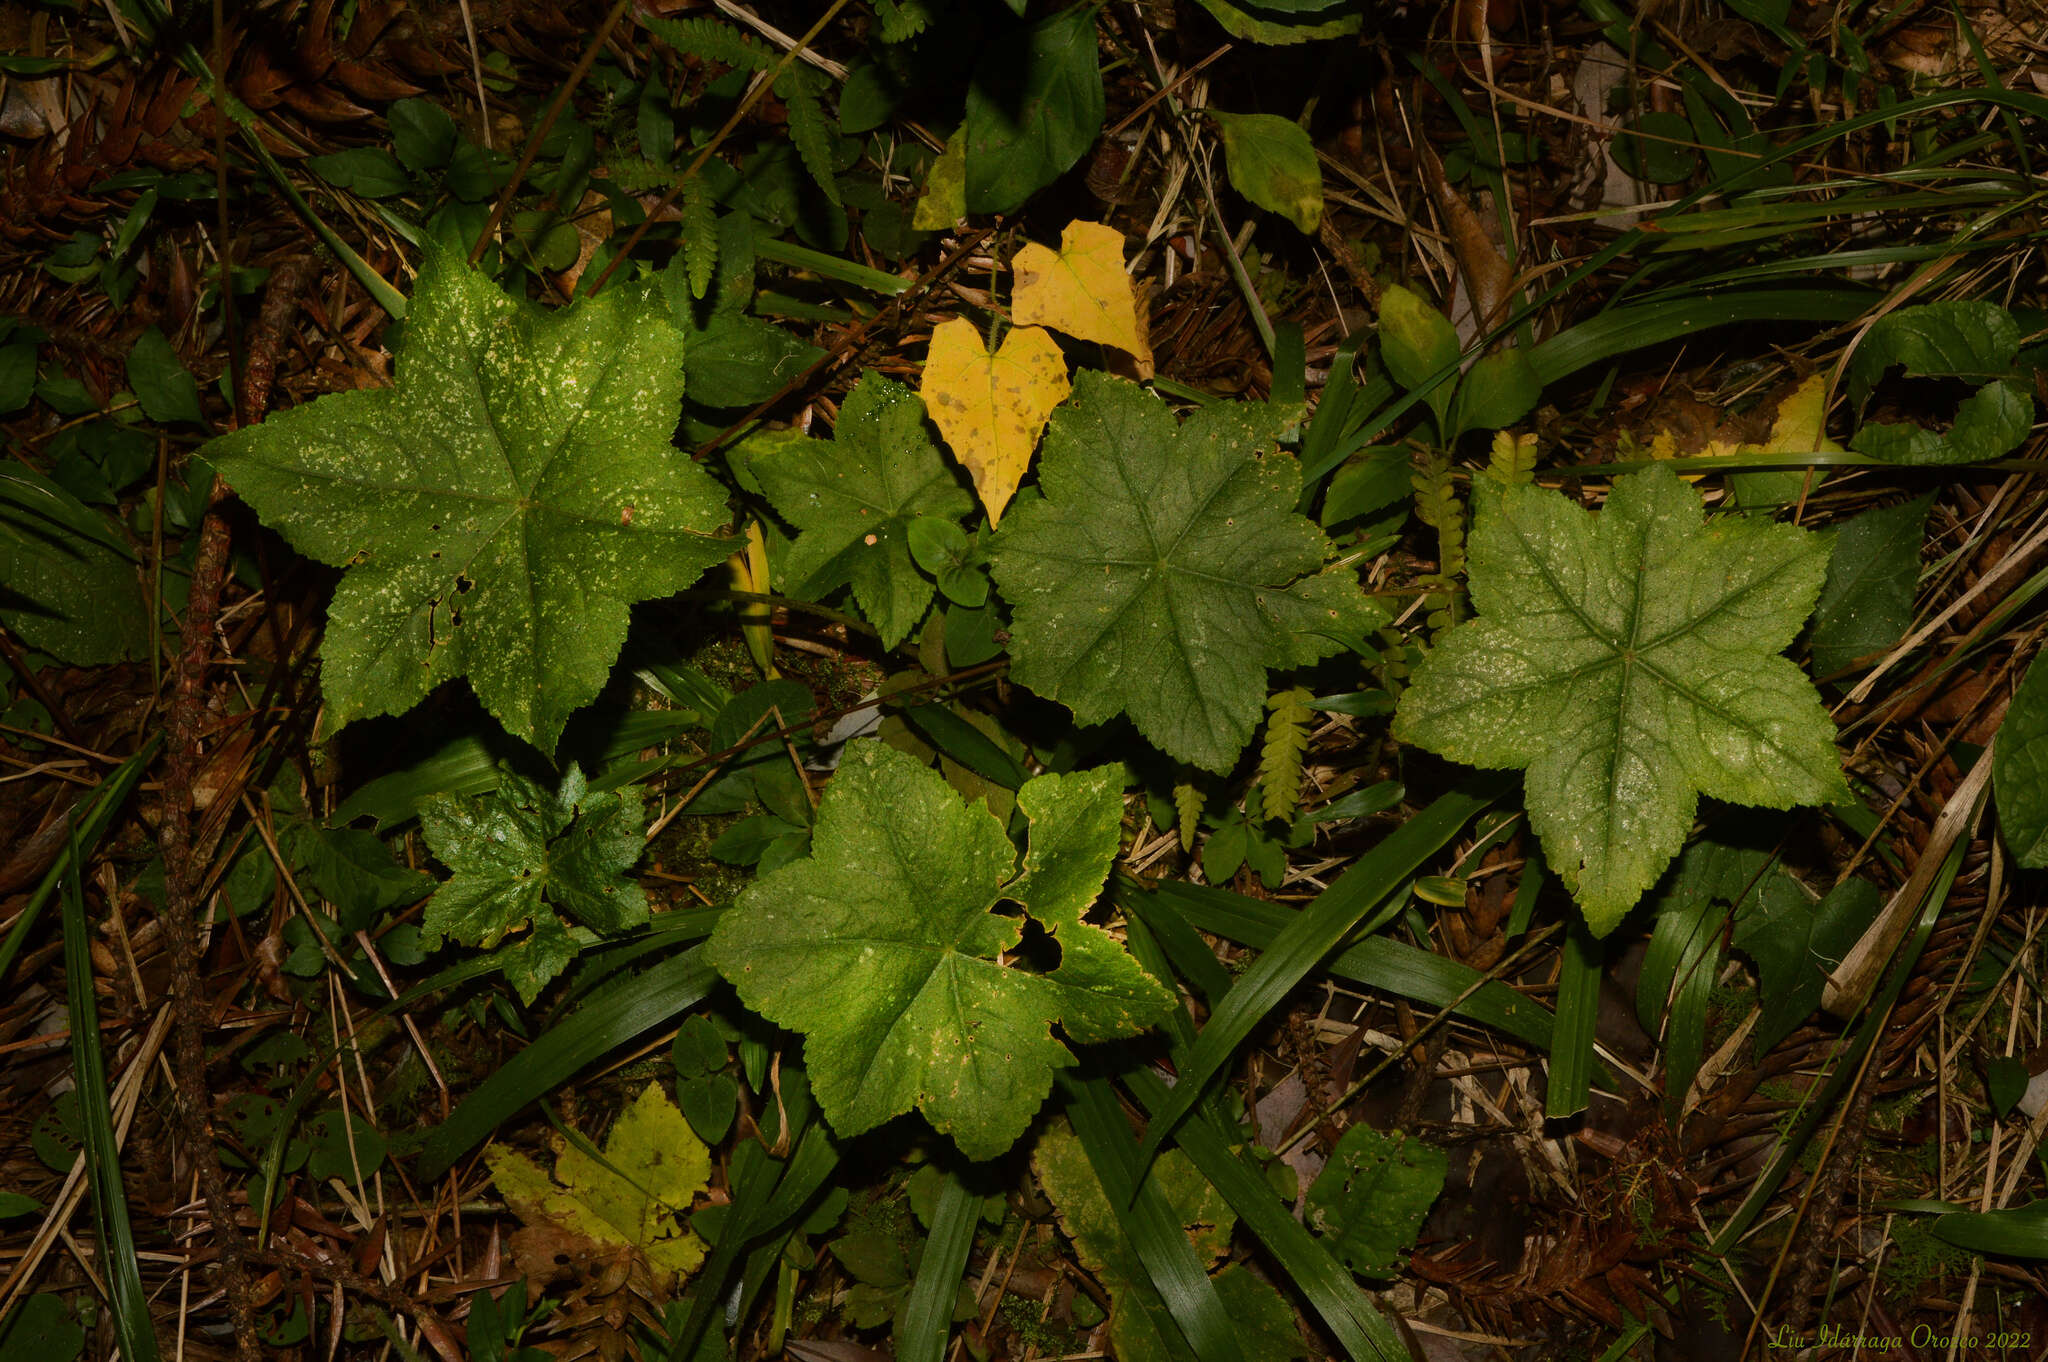 Image of Hydrocotyle quinqueloba var. macrophylla (Pohl ex DC.) Urb.